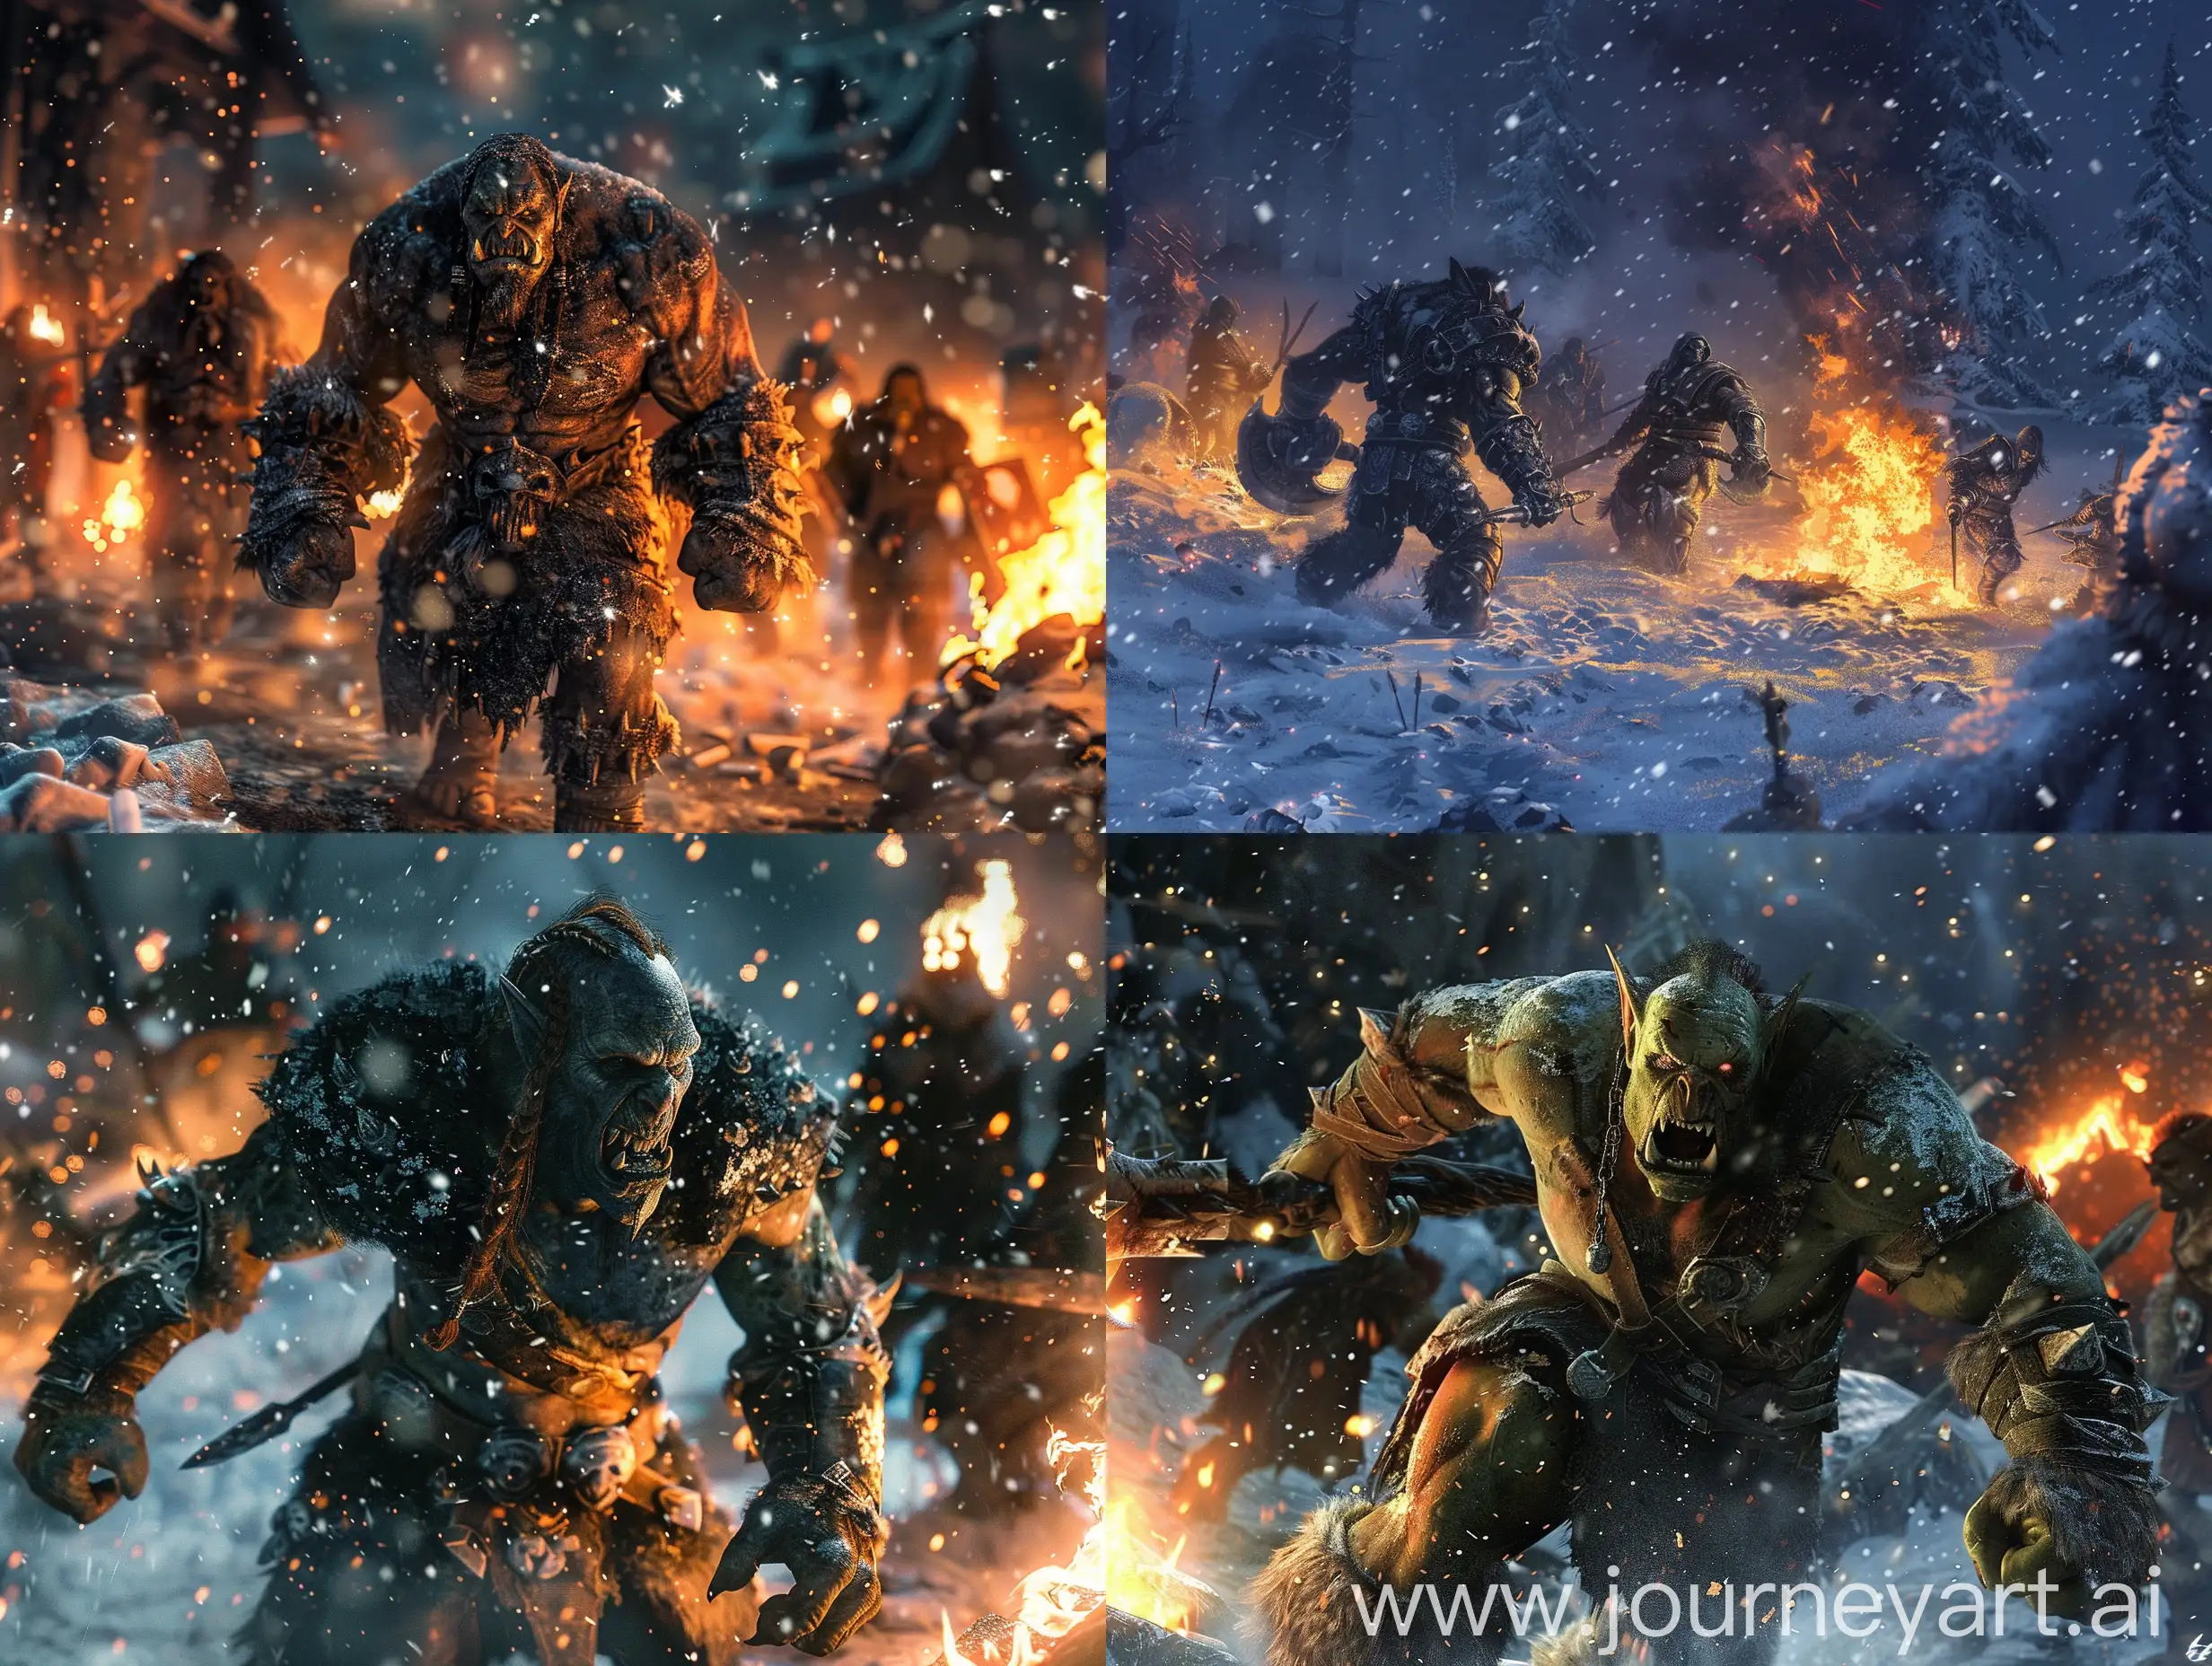 Skyrim-Orcs-Engage-in-Fiery-Night-Battle-Amidst-Snowy-Mountains